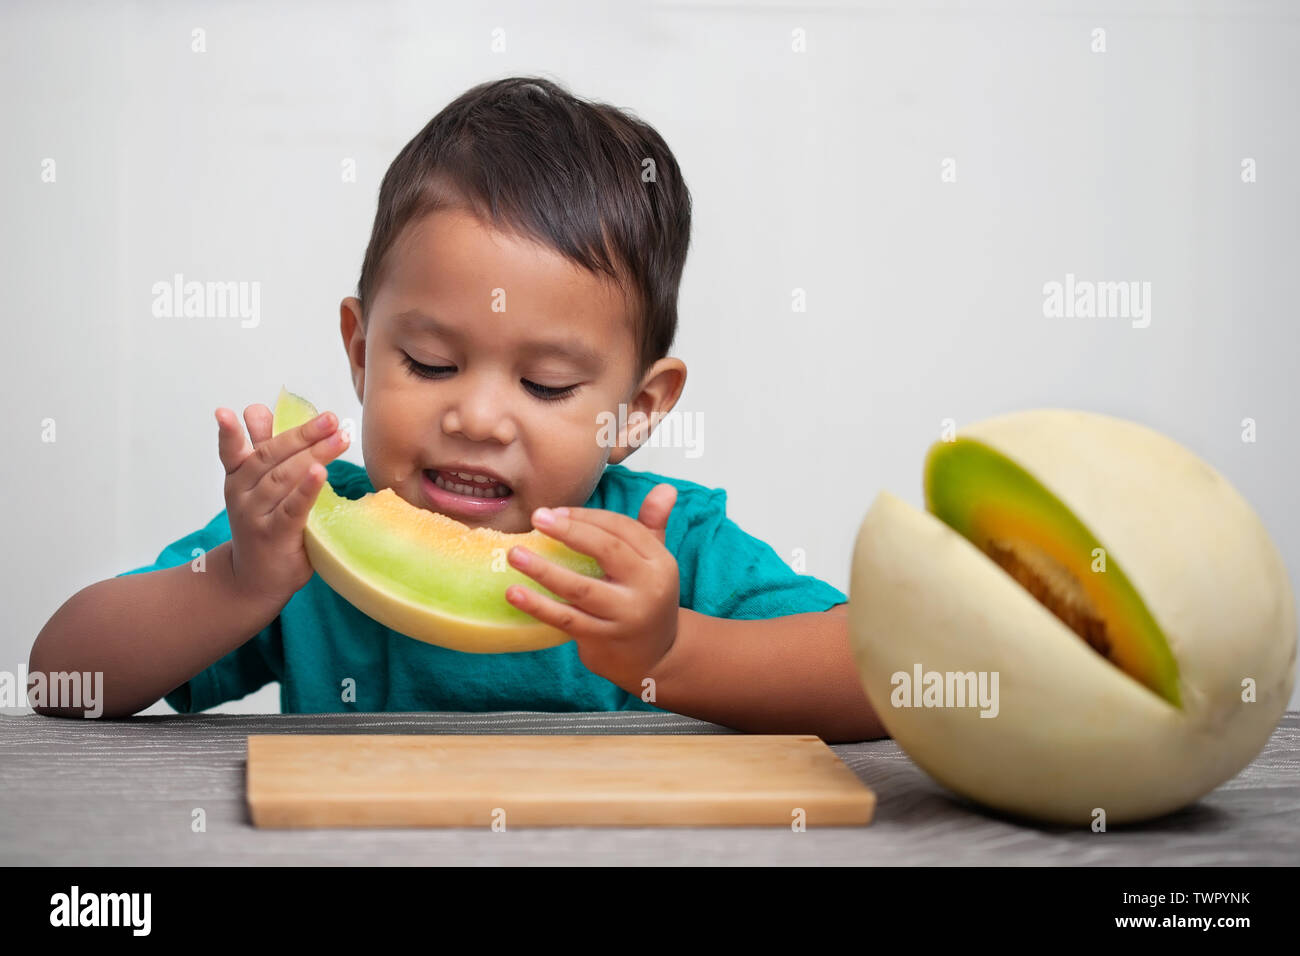 A little boy holding a slice of fresh melon fruit to his mouth that he has taken a bite out off, and enjoying the juicy sweet taste. Stock Photo